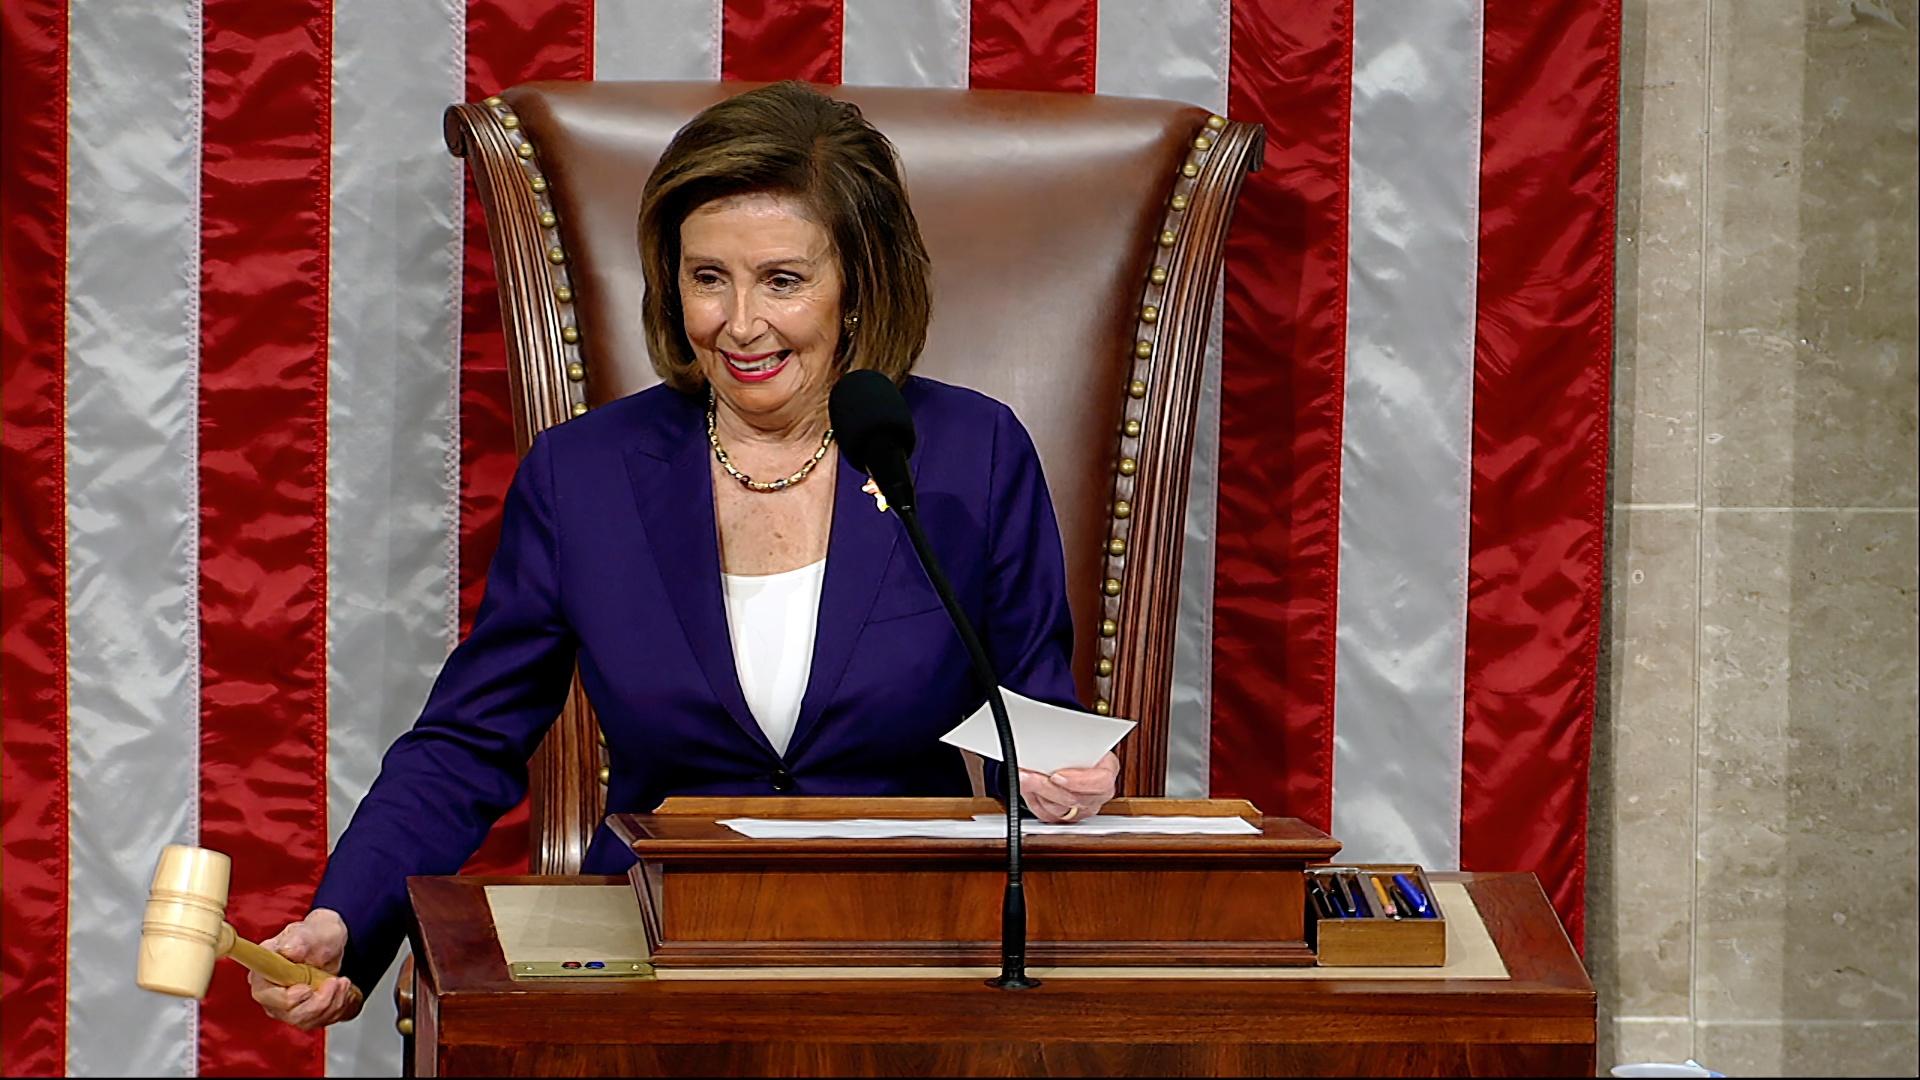 In this image from House Television, House Speaker Nancy Pelosi of Calif., announces final passage of the bill with protections for same-sex marriages, on the House Floor on Thursday, Dec. 8, 2022, in Washington. The bipartisan legislation, which passed 258-169, would also protect interracial unions by requiring states to recognize legal marriages regardless of “sex, race, ethnicity, or national origin.” (Senate Television via AP)